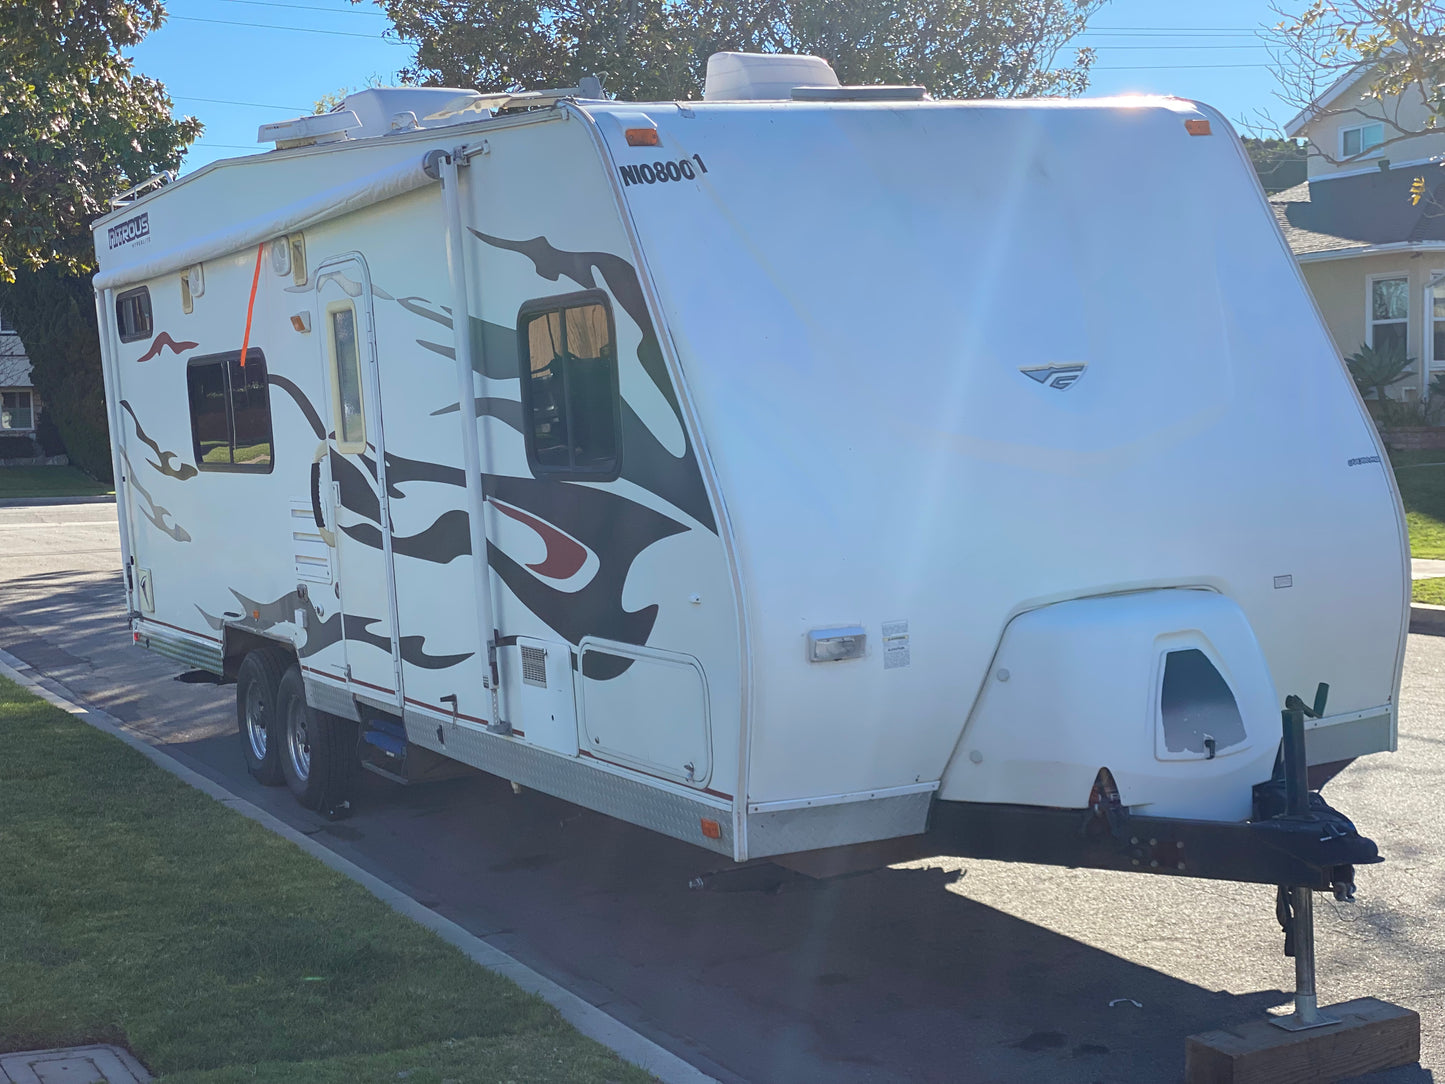 Rv Toy Hauler Rentals for Dirt Bikes and ATV's